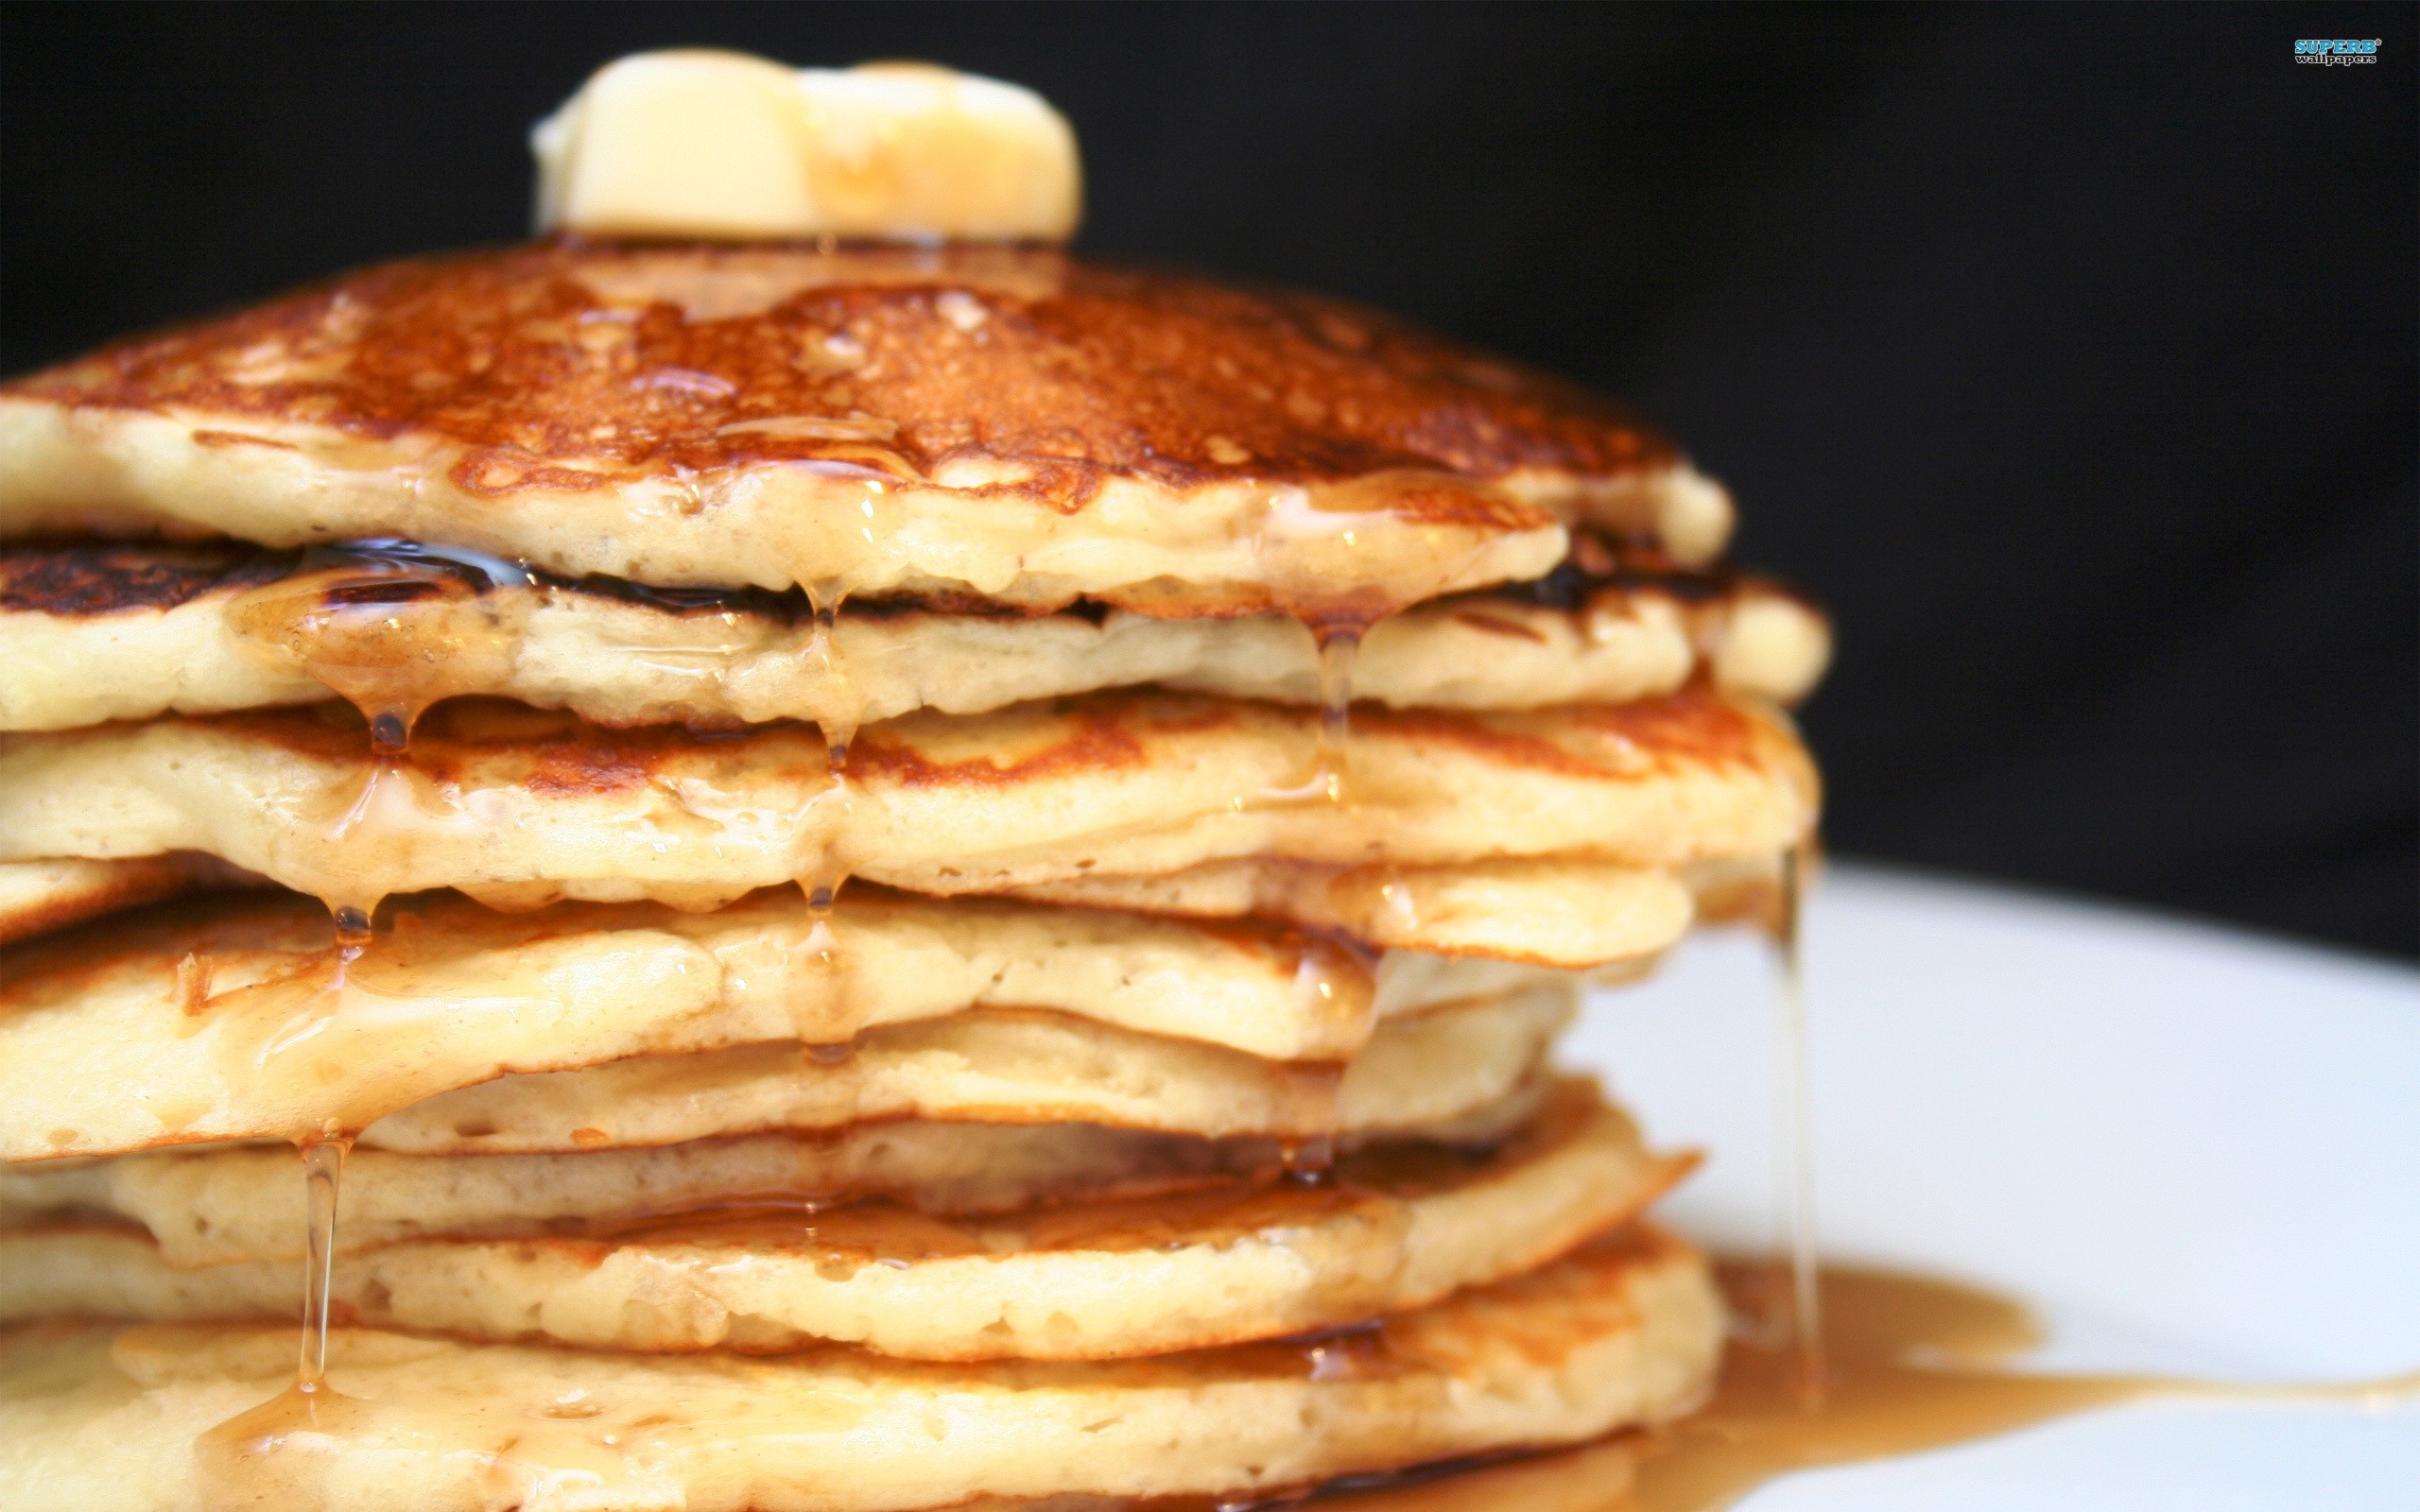 General 2560x1600 pancakes butter syrup food sweets closeup